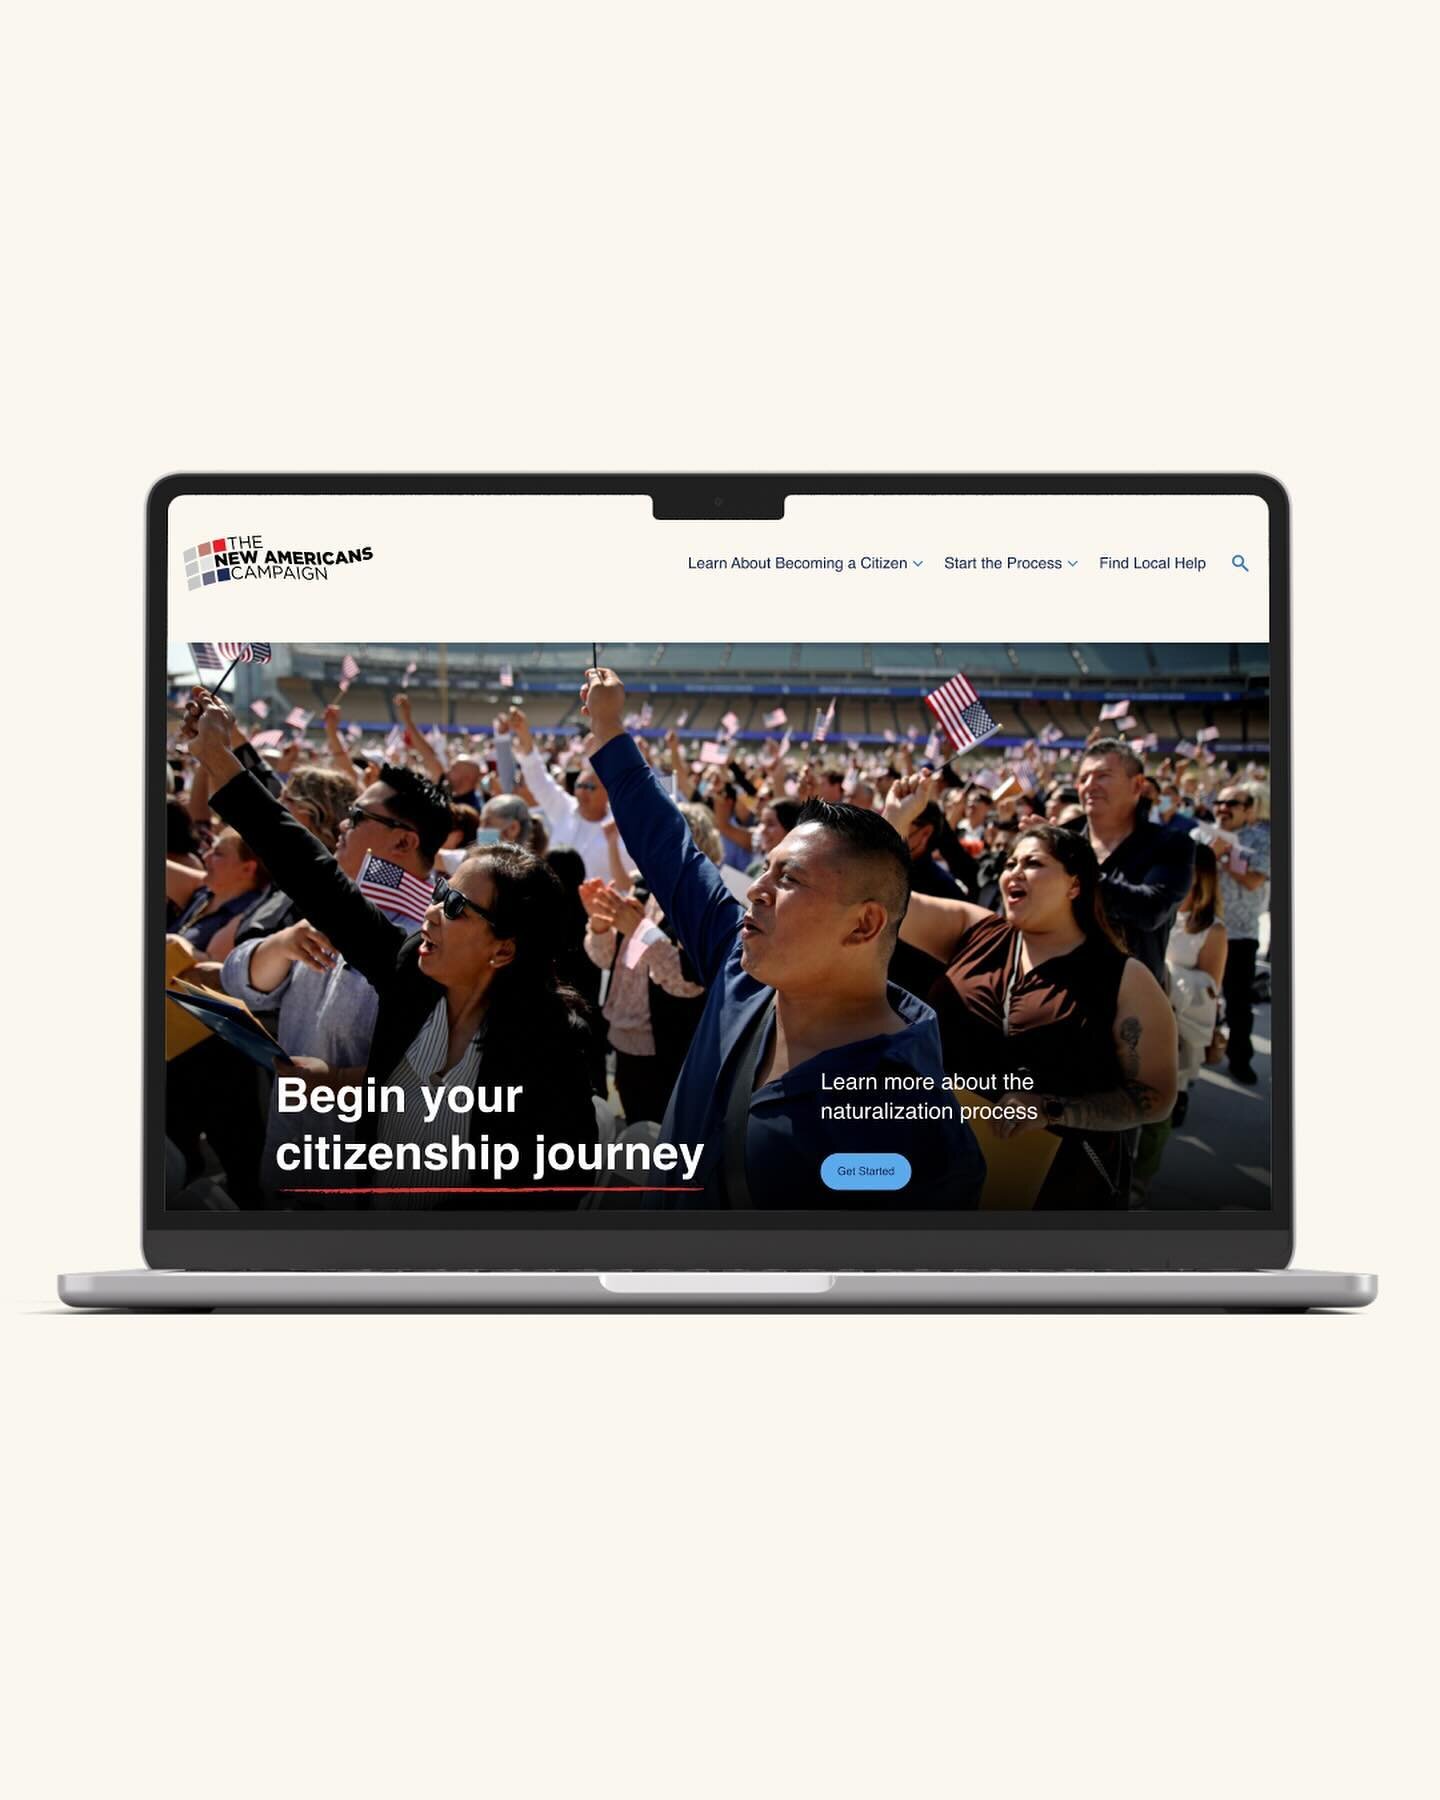 New Work &mdash; Web Design for New Americans Campaign &mdash; Transforming the Path to Citizenship 

Did you know that despite 9 million lawful permanent residents being eligible for US citizenship, fewer than 1 million apply for naturalization annu